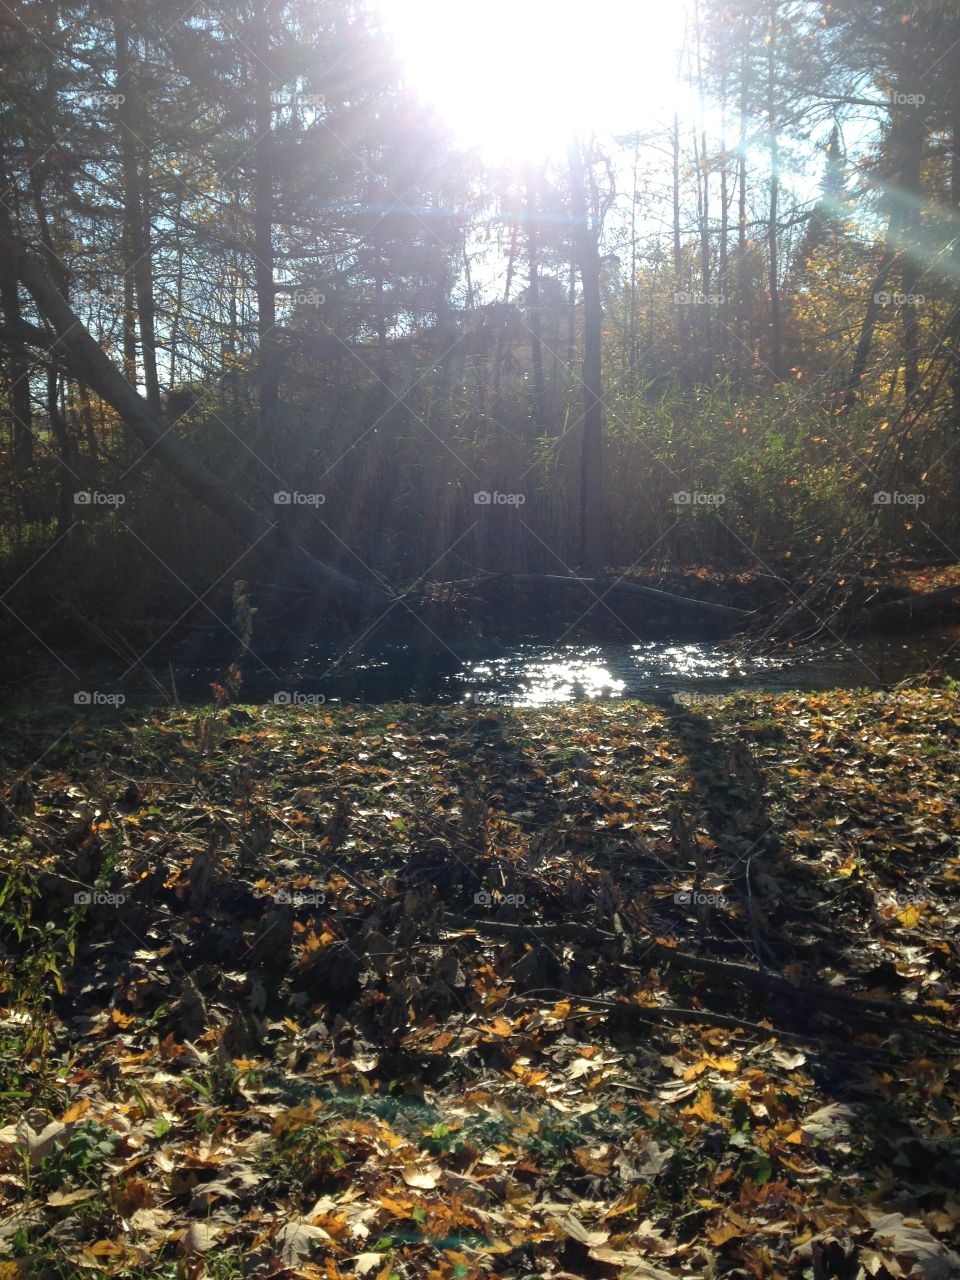 Sunlit fall afternoon, crunchy leaves and pine trees by a creek